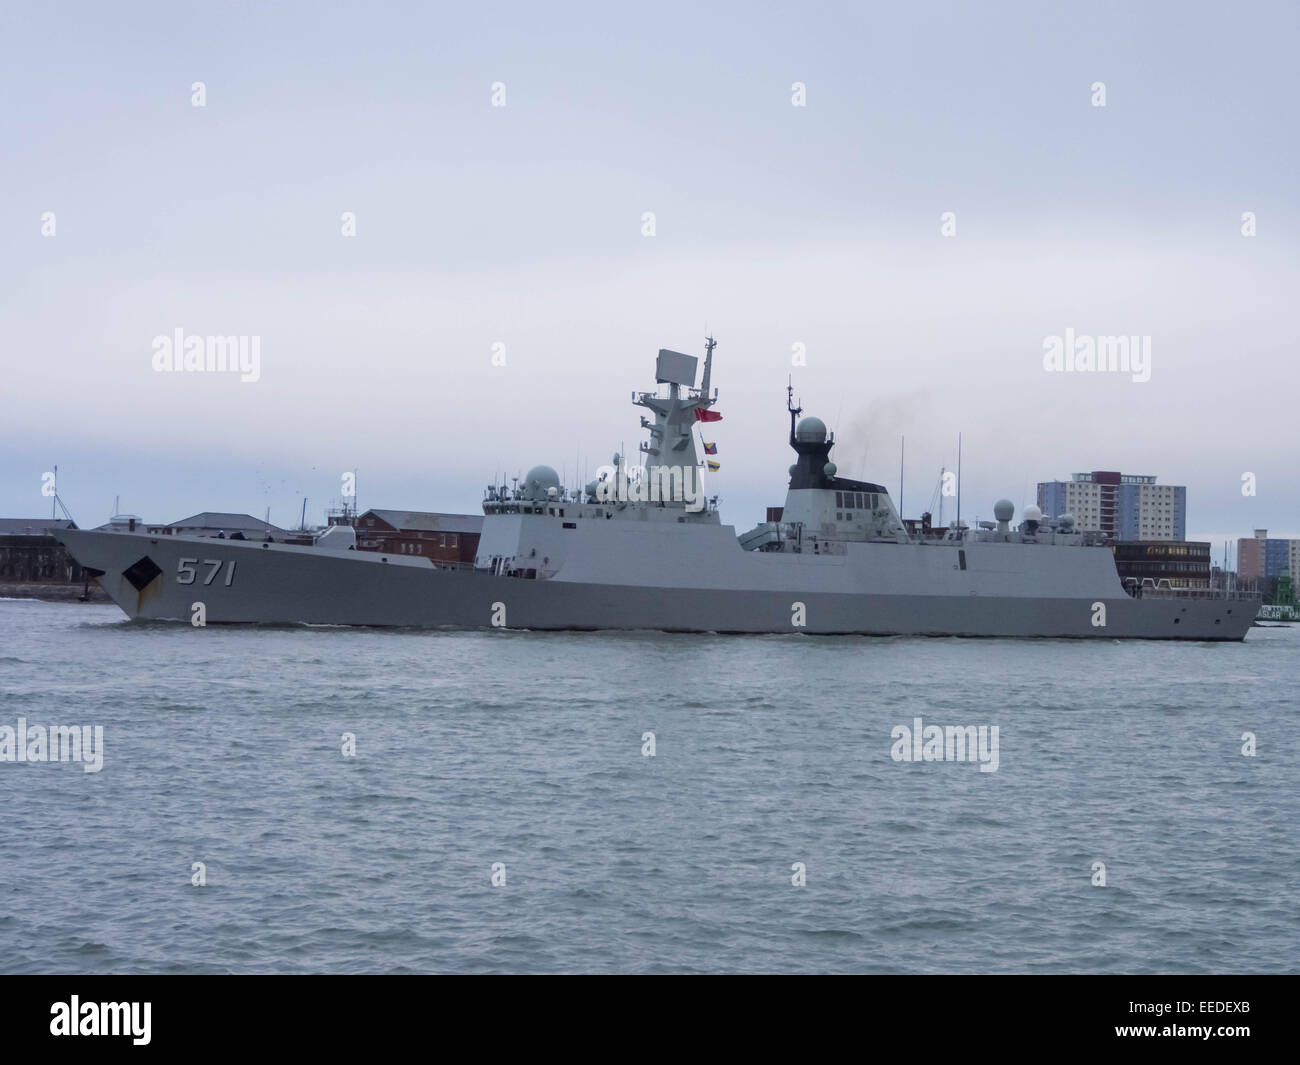 Portsmouth, England, 16th January 2015.The frigate Yun Cheng of the People's Liberation Army Navy leaves Portsmouth Harbour after a 5 day visit aimed at enhancing military understanding between the UK and China. The frigate Yun Chenga was accompanied by the assault ship Chang Bai Shan  and the replenishment ship Chaohu. Credit:  simon evans/Alamy Live News Stock Photo